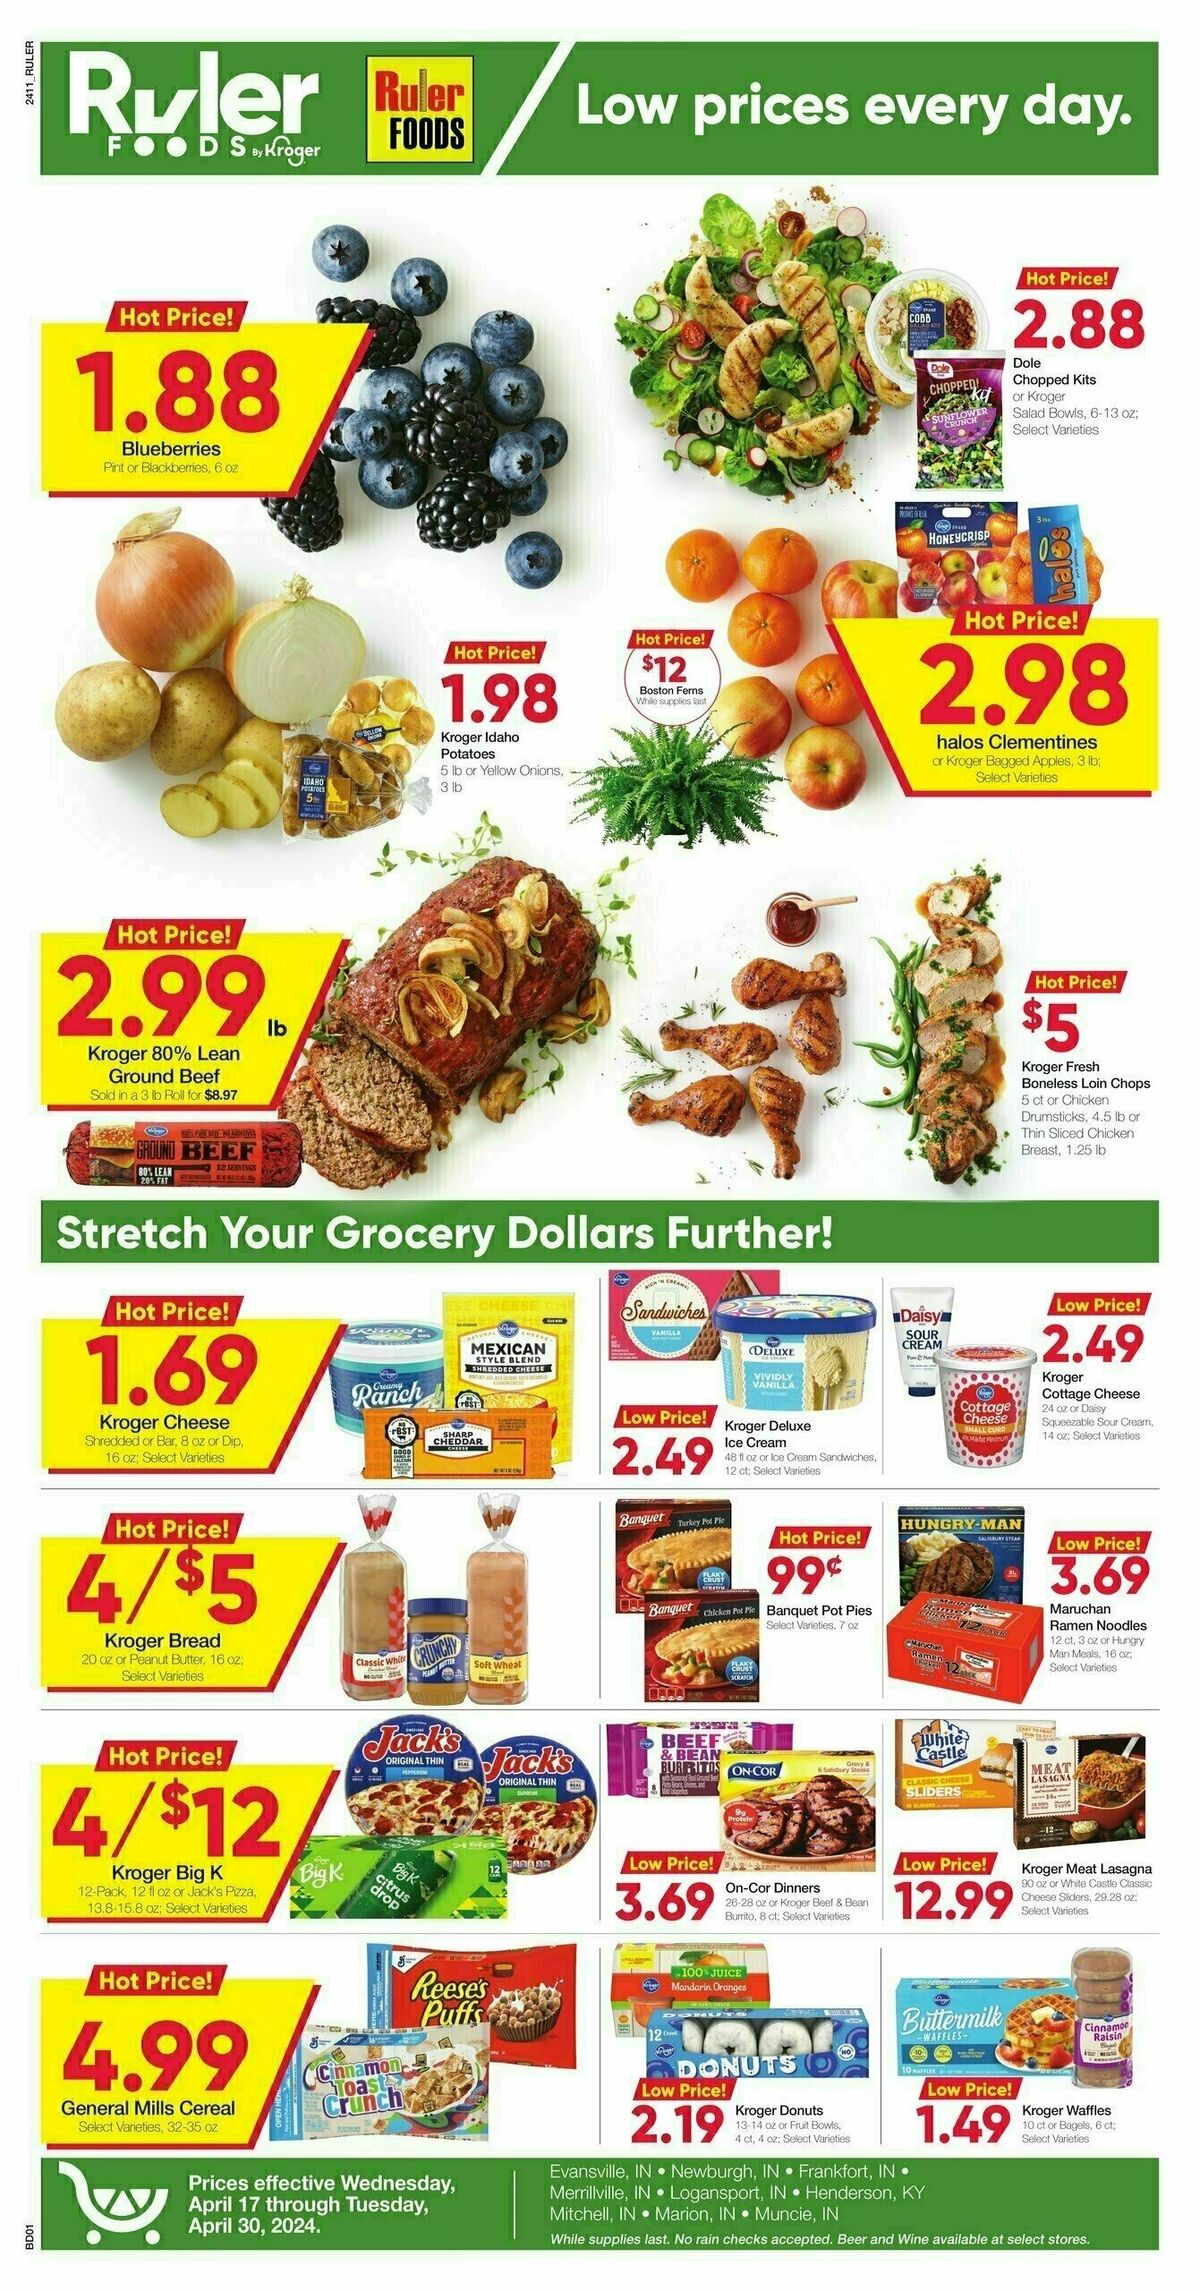 Ruler Foods Weekly Ad from April 17